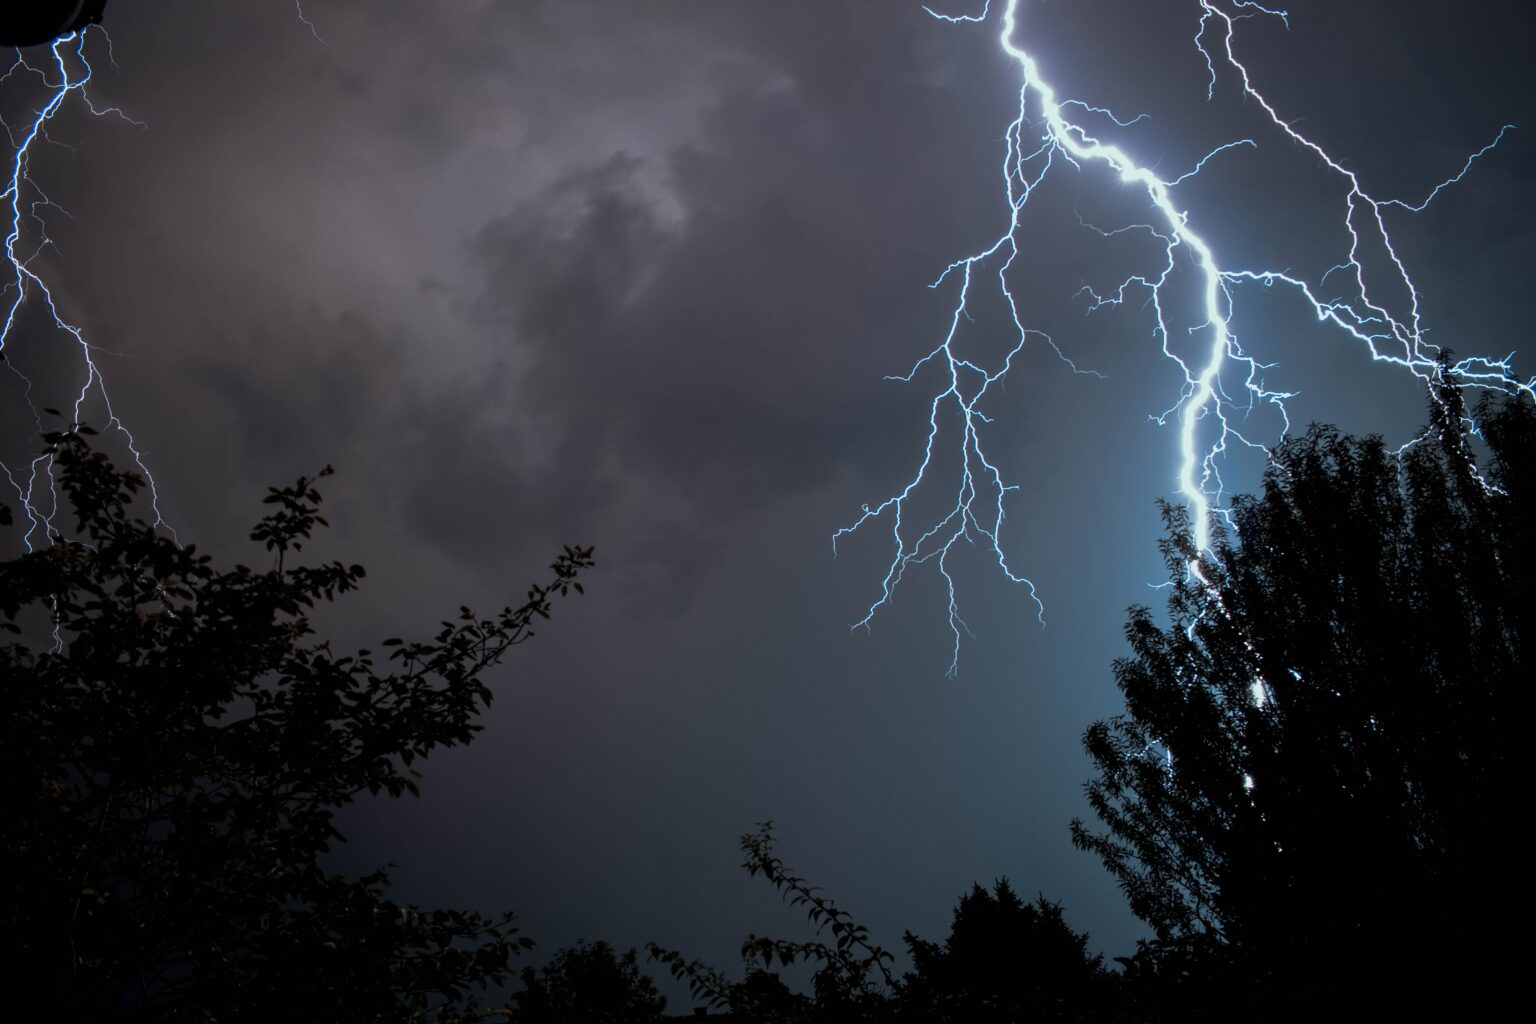 Zoomed-in image of lightning strike at night. This is one of many conditions to watch out for while performing a home inspection during extreme weather.